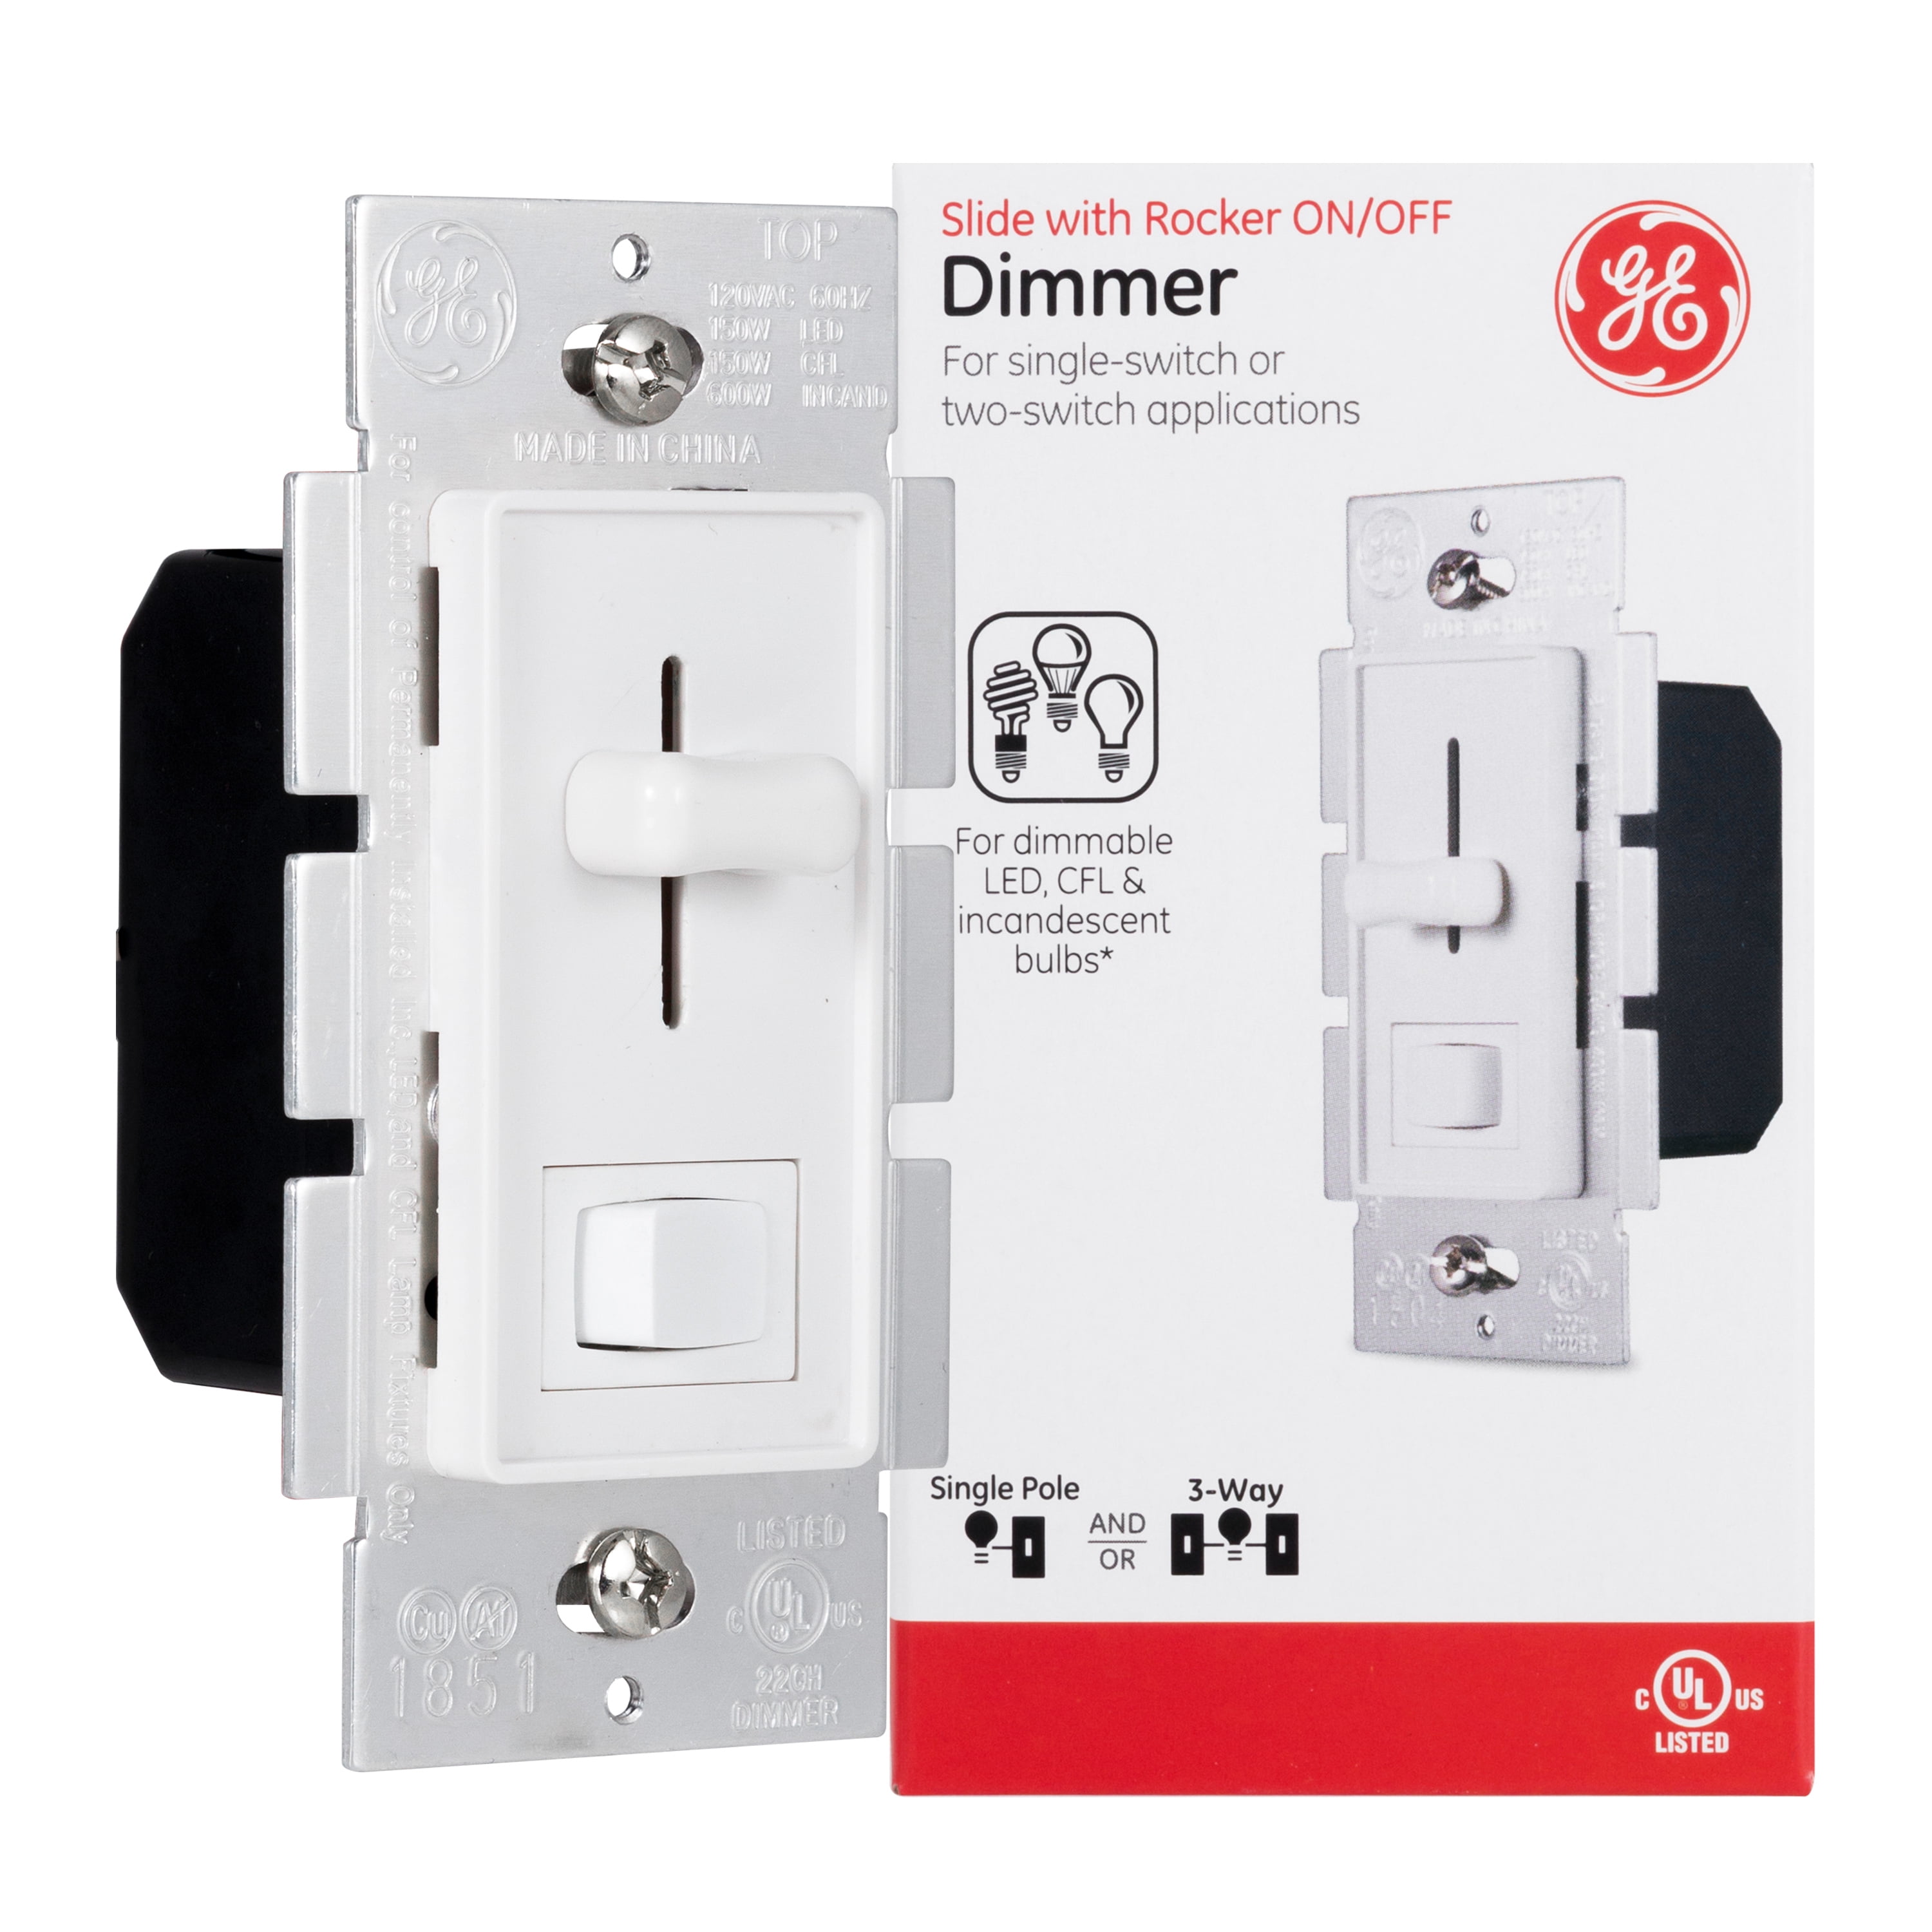 150W or 700W Max Rocker and Slide Switch CFL/LED Dimmer Single Pole/3-Way 